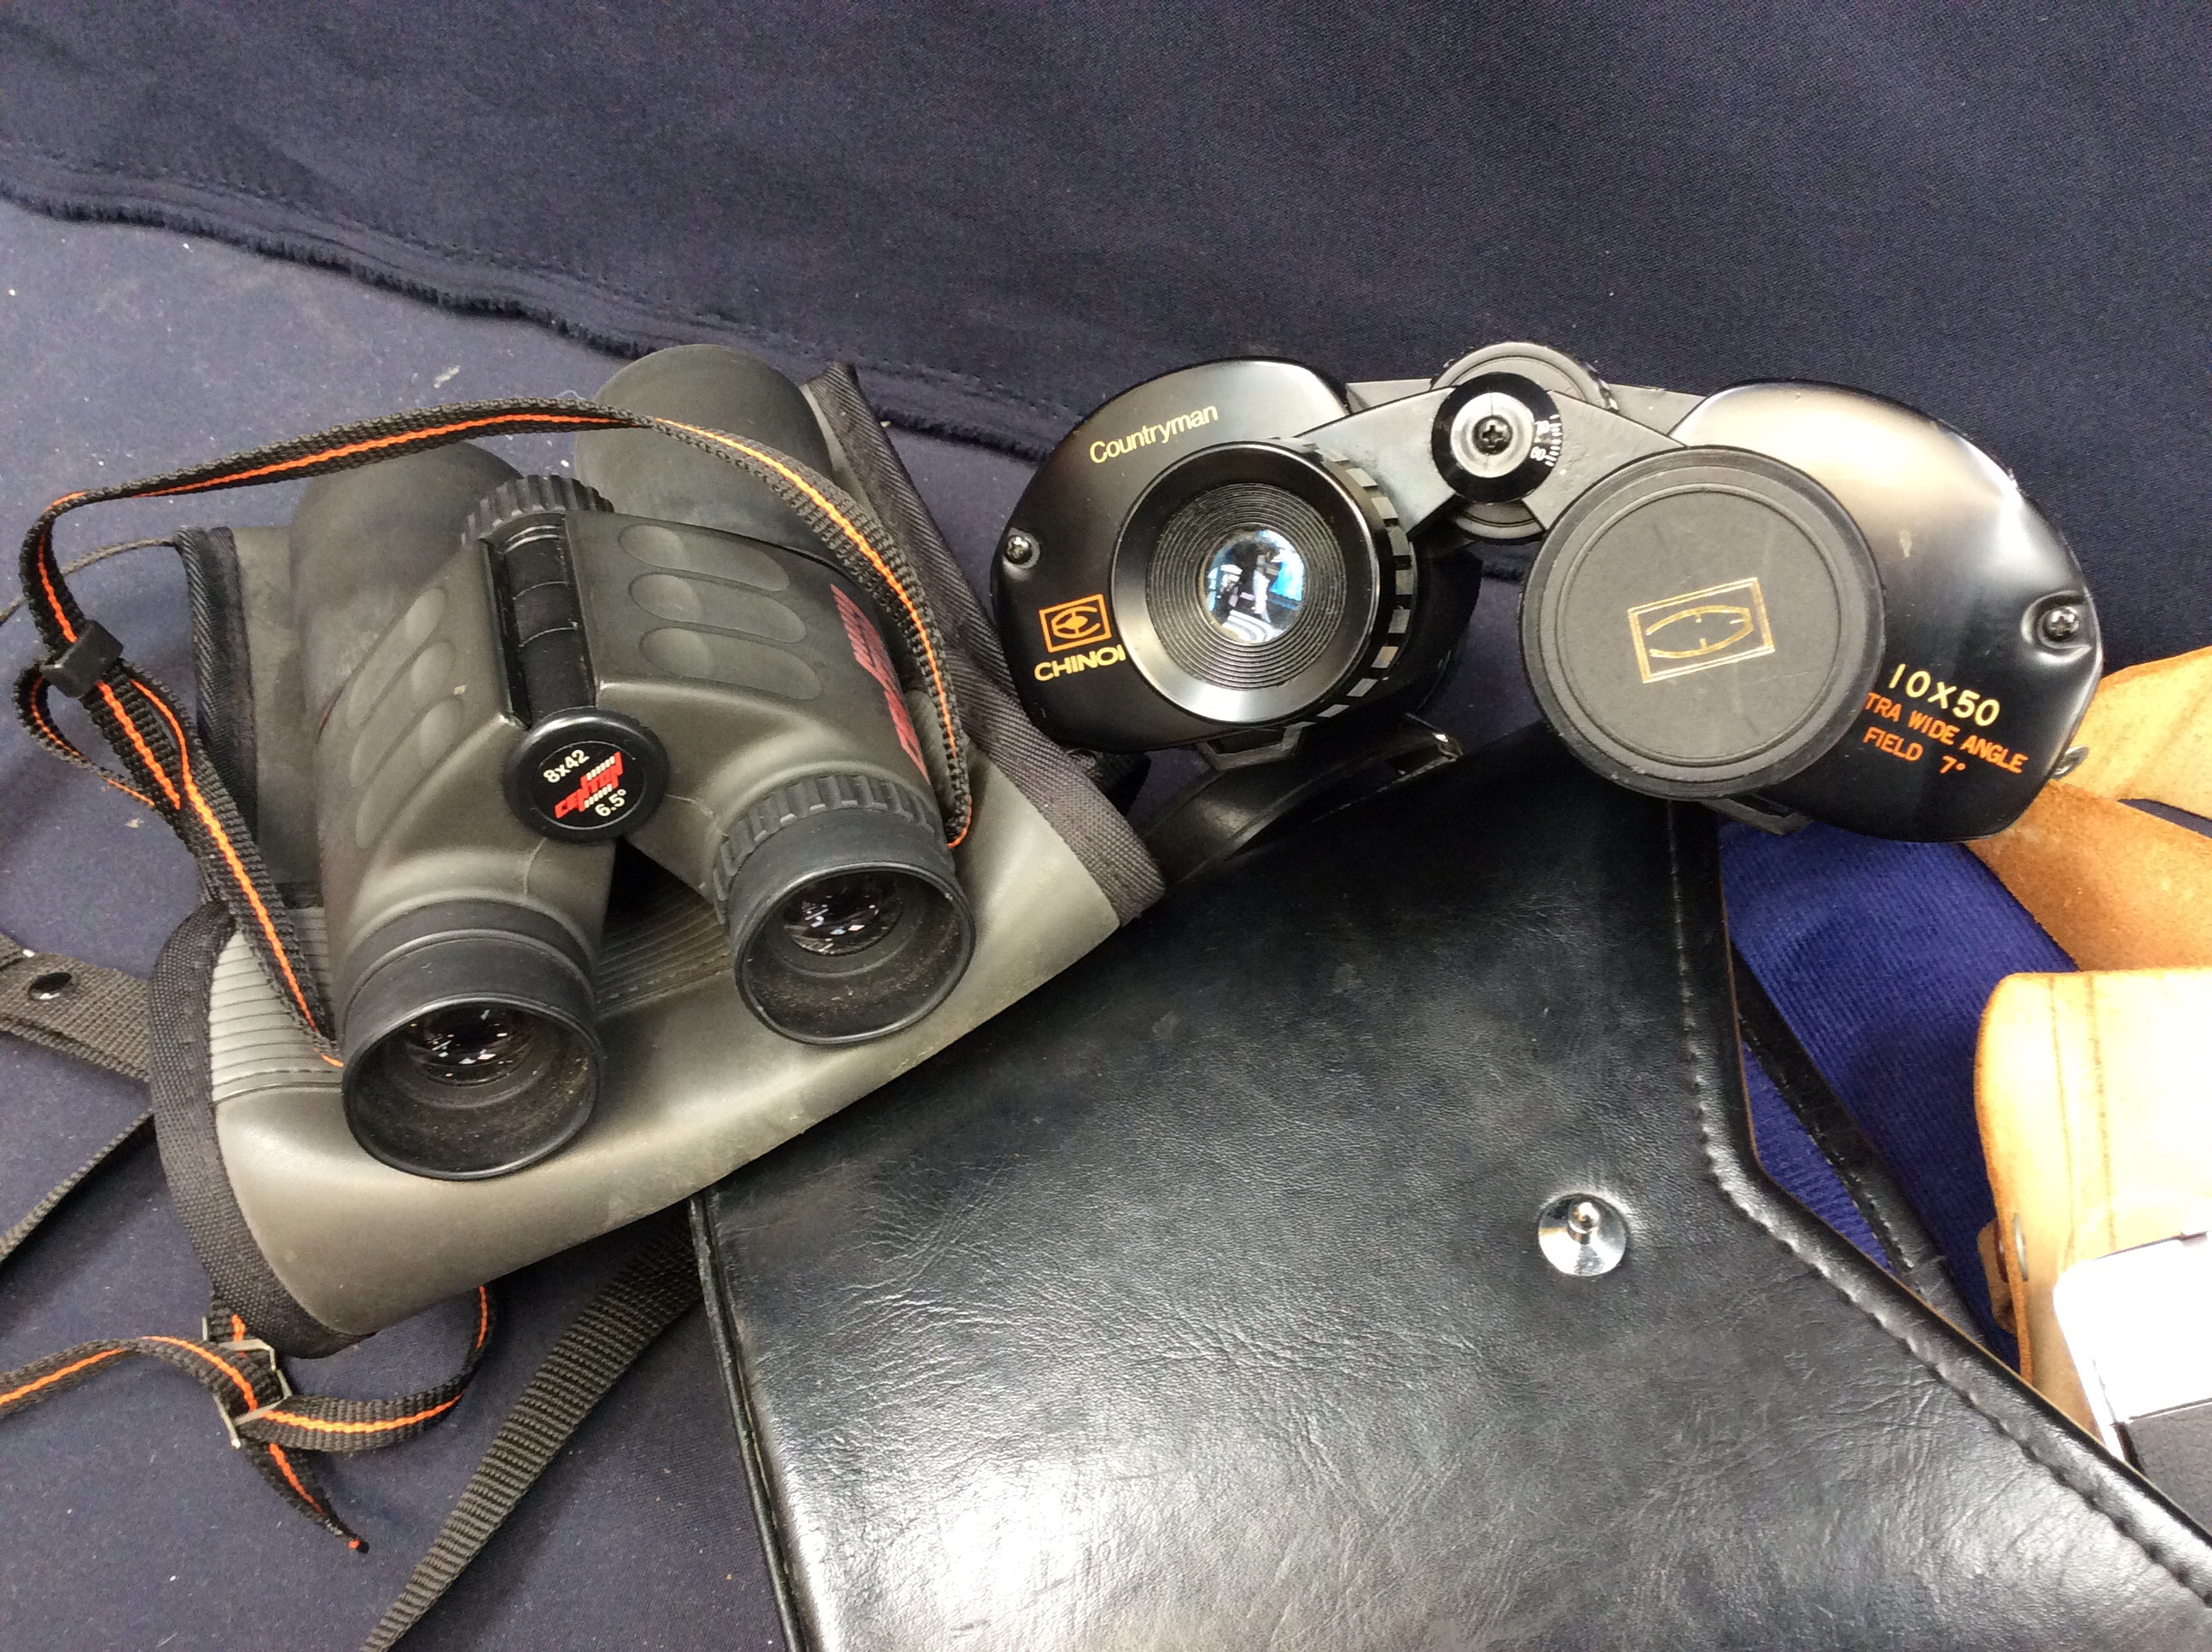 Two pairs of binoculars, vintage camera and a collection of vintage pin badges. - Image 2 of 3